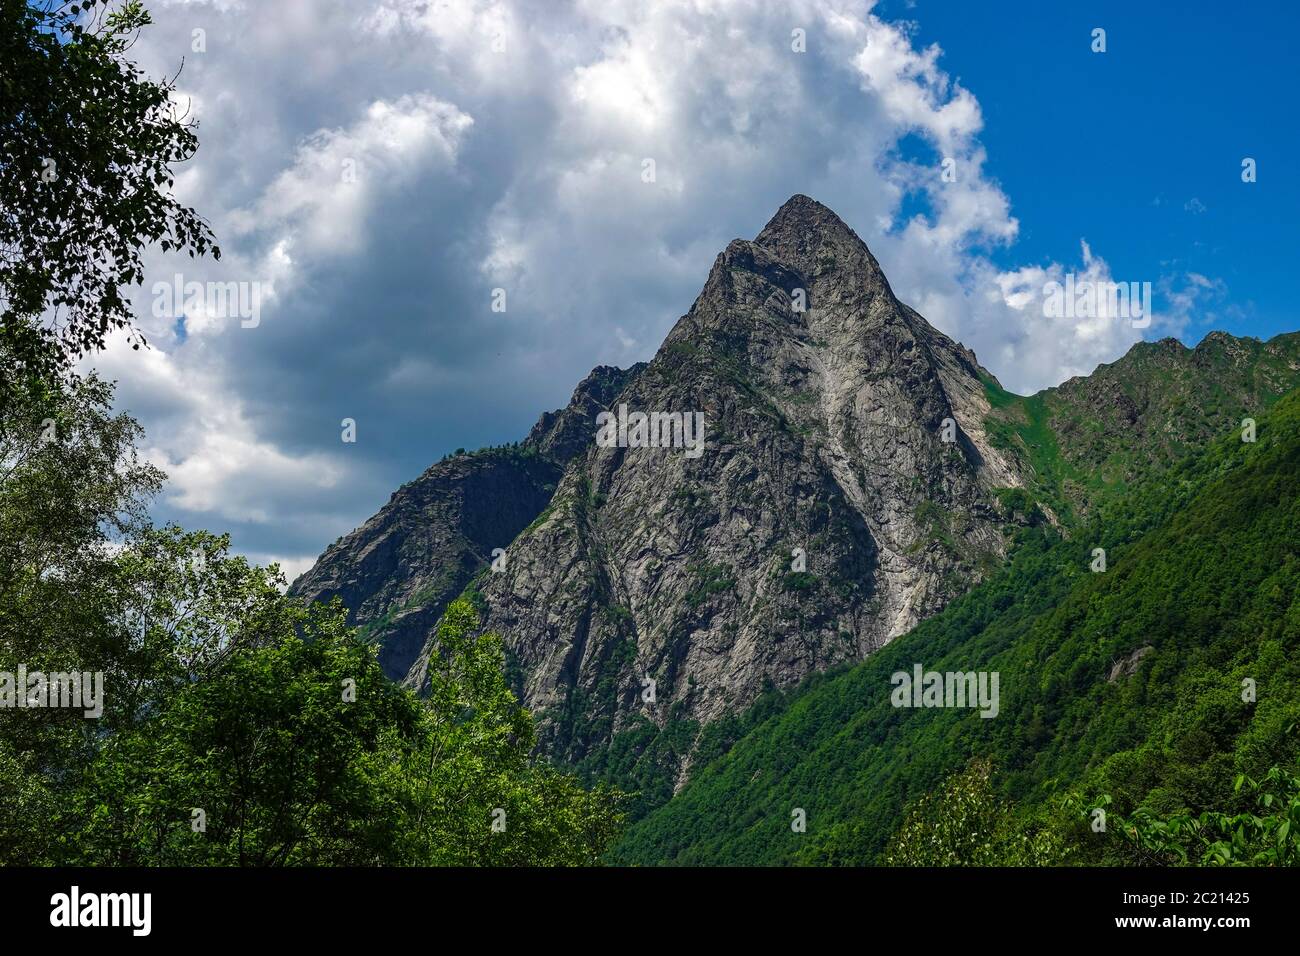 The prominent rocky peak of the Dent d'Orlu, Ax les Thermes, Ariege, French Pyrenees, France Stock Photo